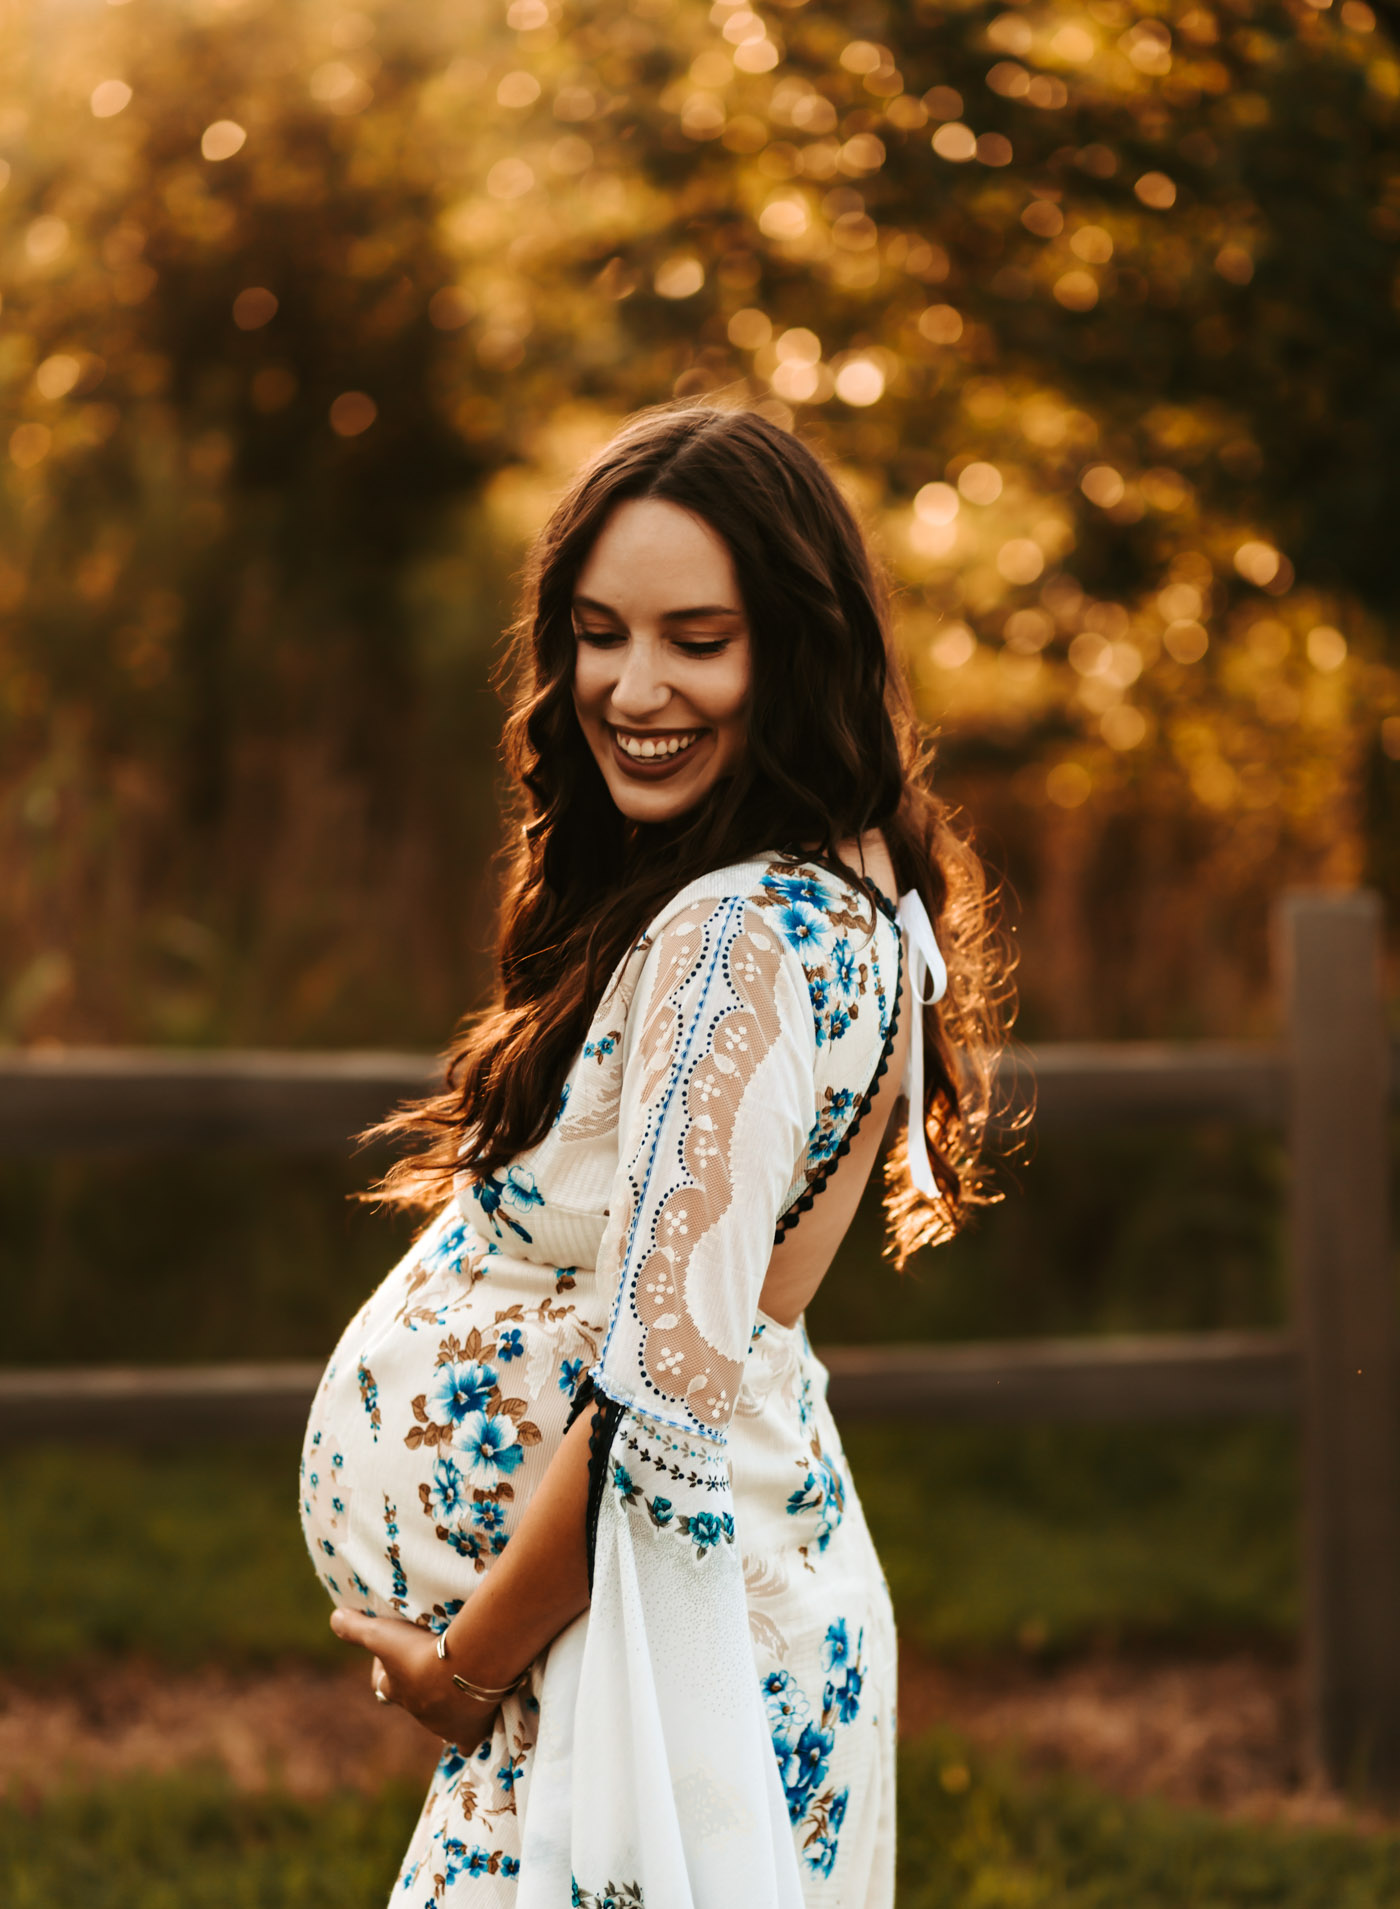 Tips for Posing in Maternity Photography | OM SYSTEM